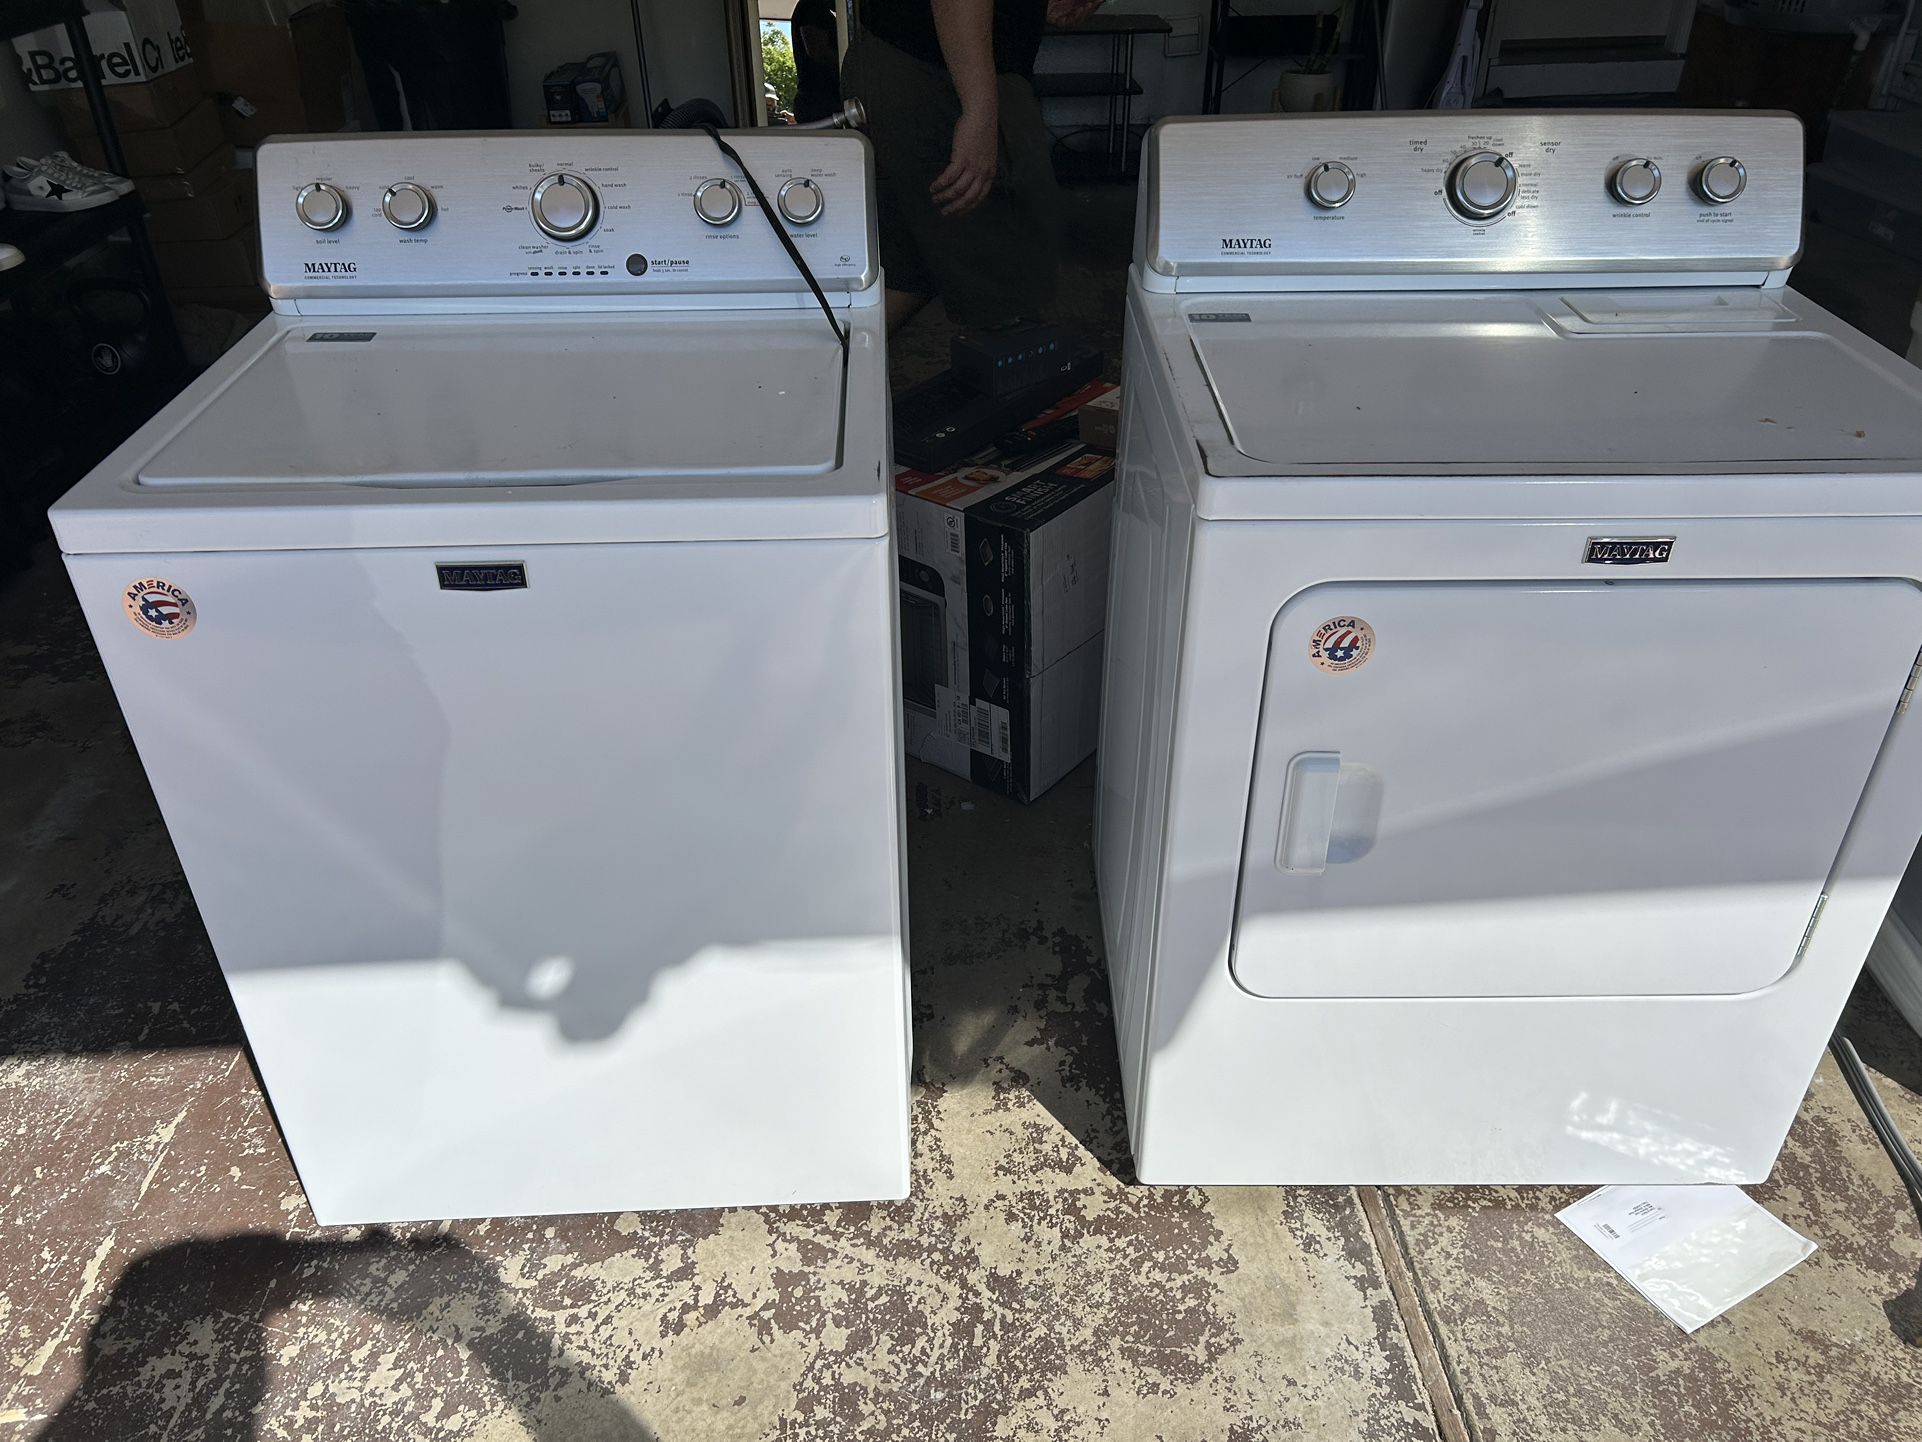 Maytag Washer And Dryer FULLY FUNCTIONAL GREAT BUY !!!!! First Come First Serve